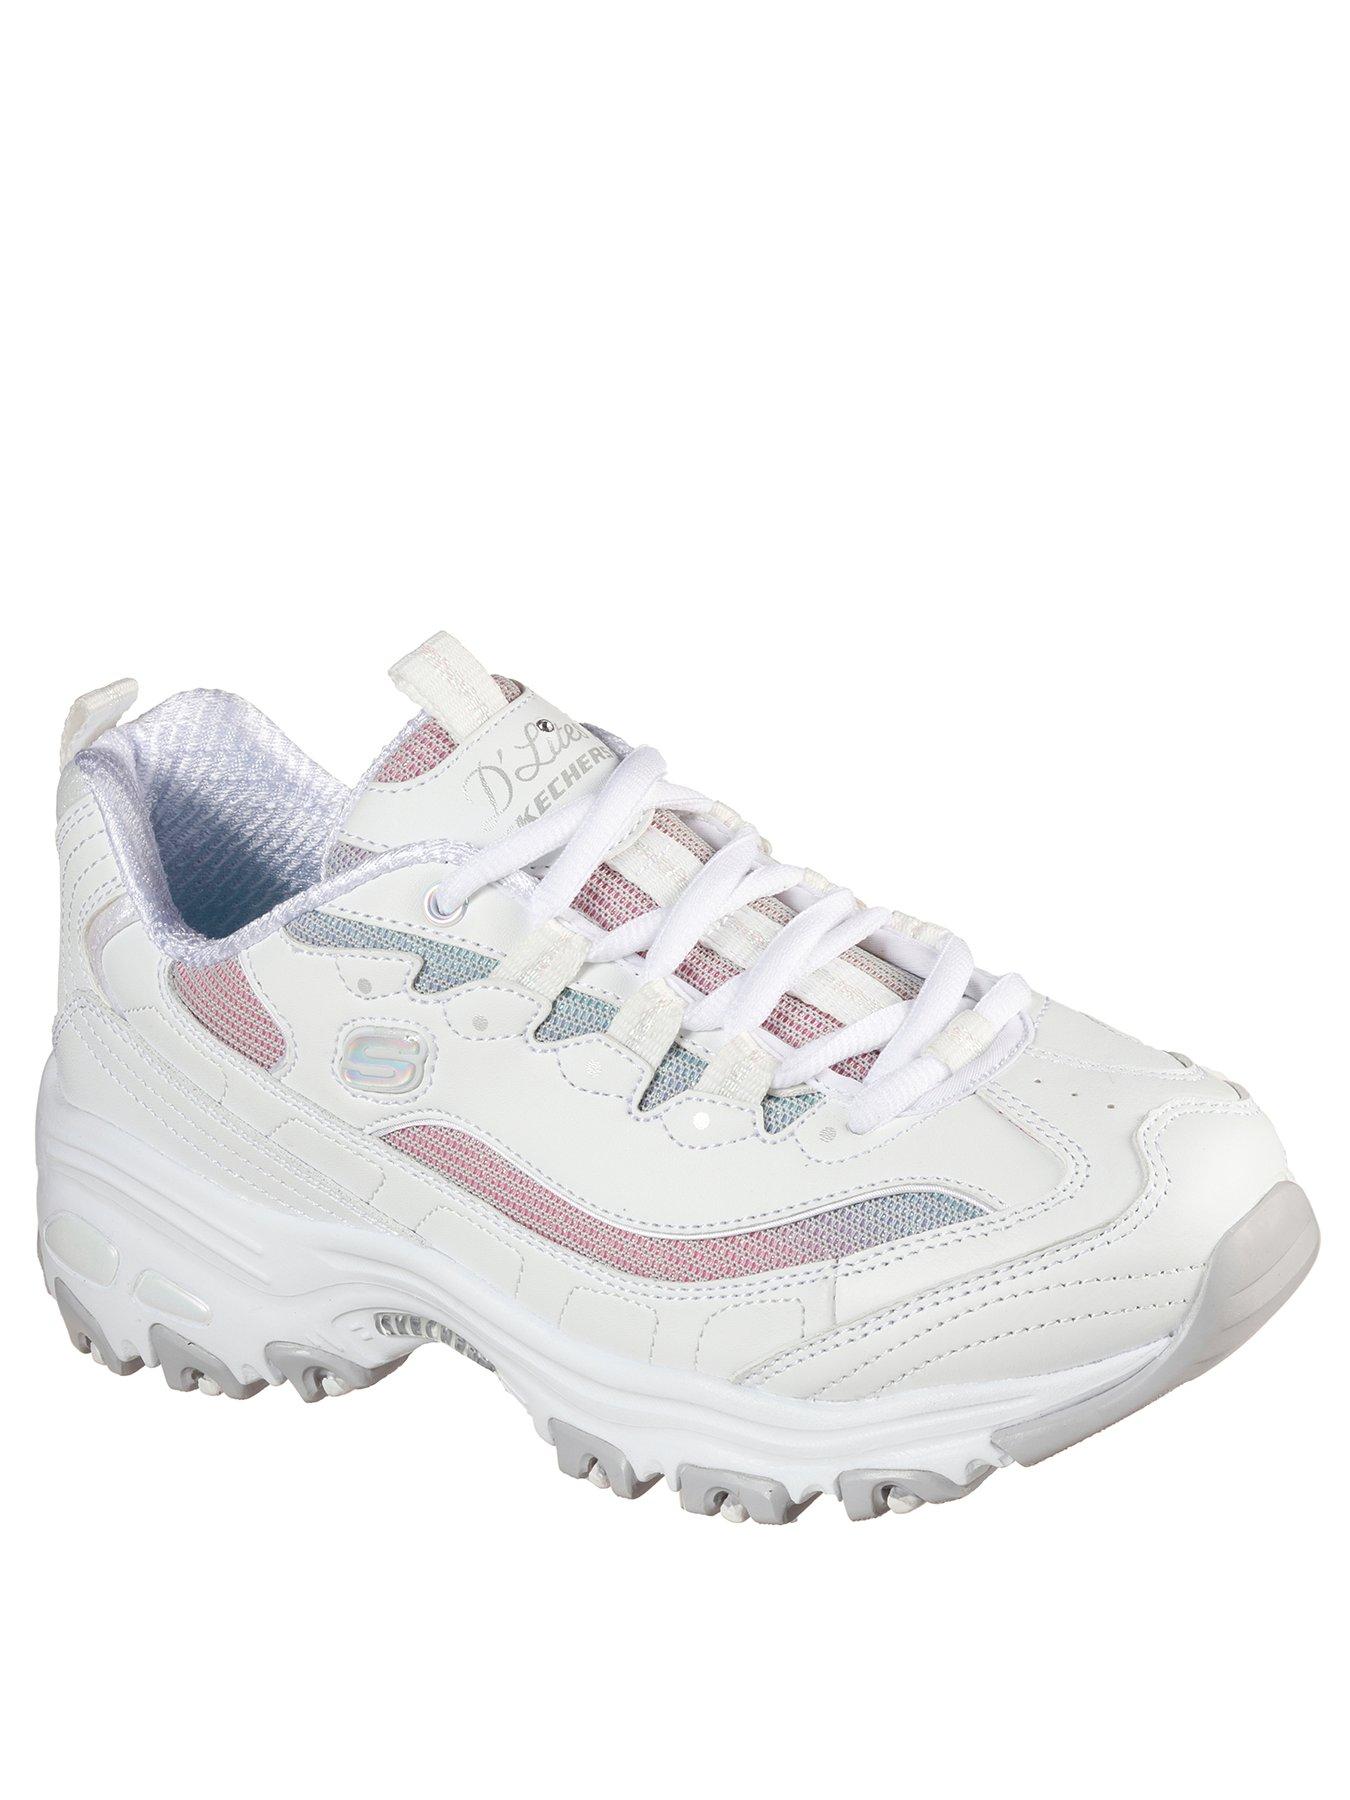 skechers ombre trainers